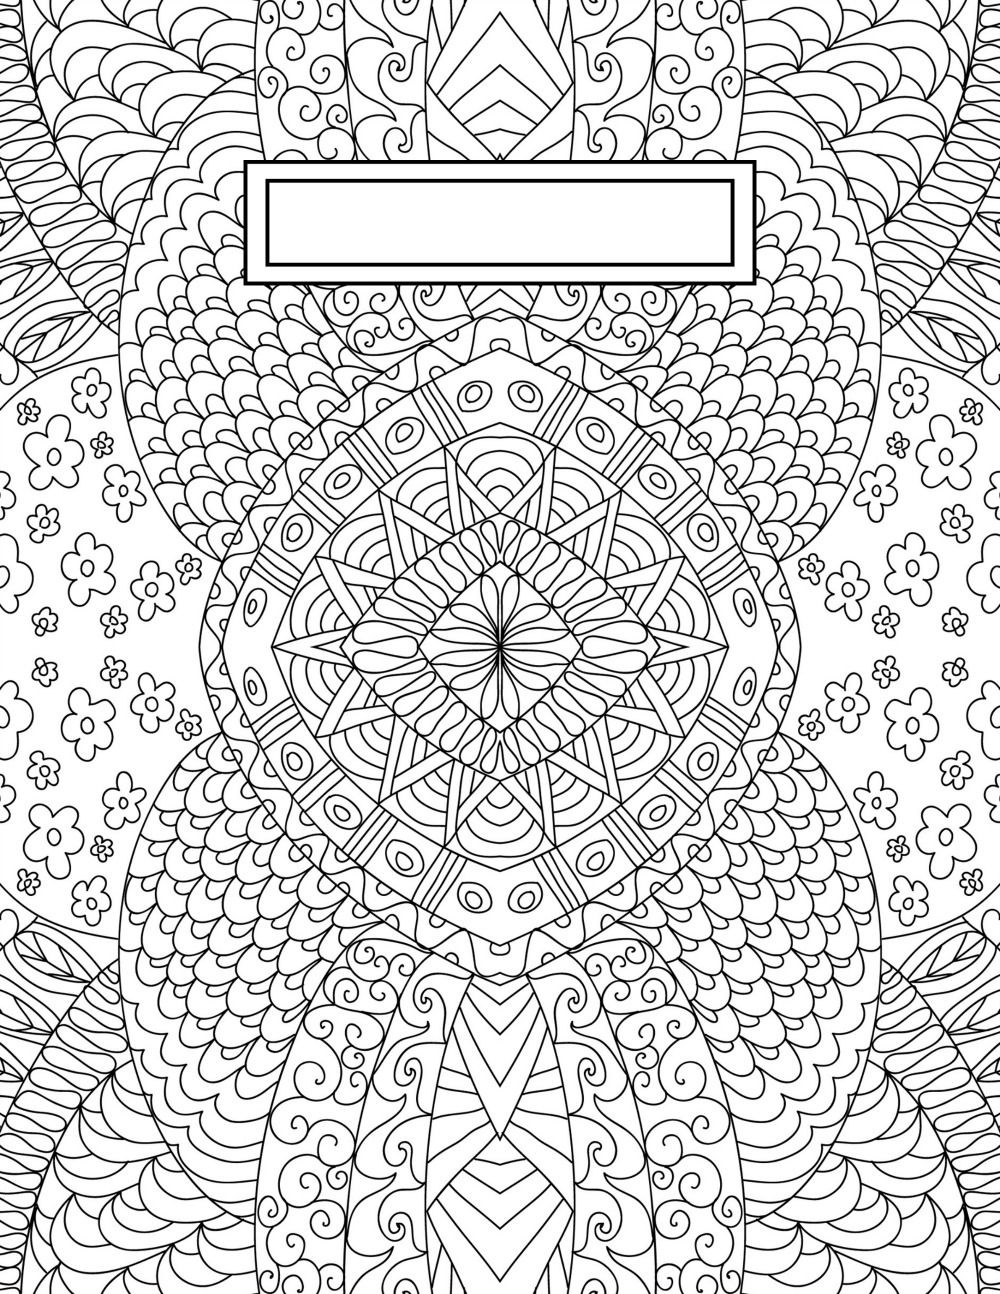 Pindanielle Tansy On Printables Binder Covers, Coloring Pages Free